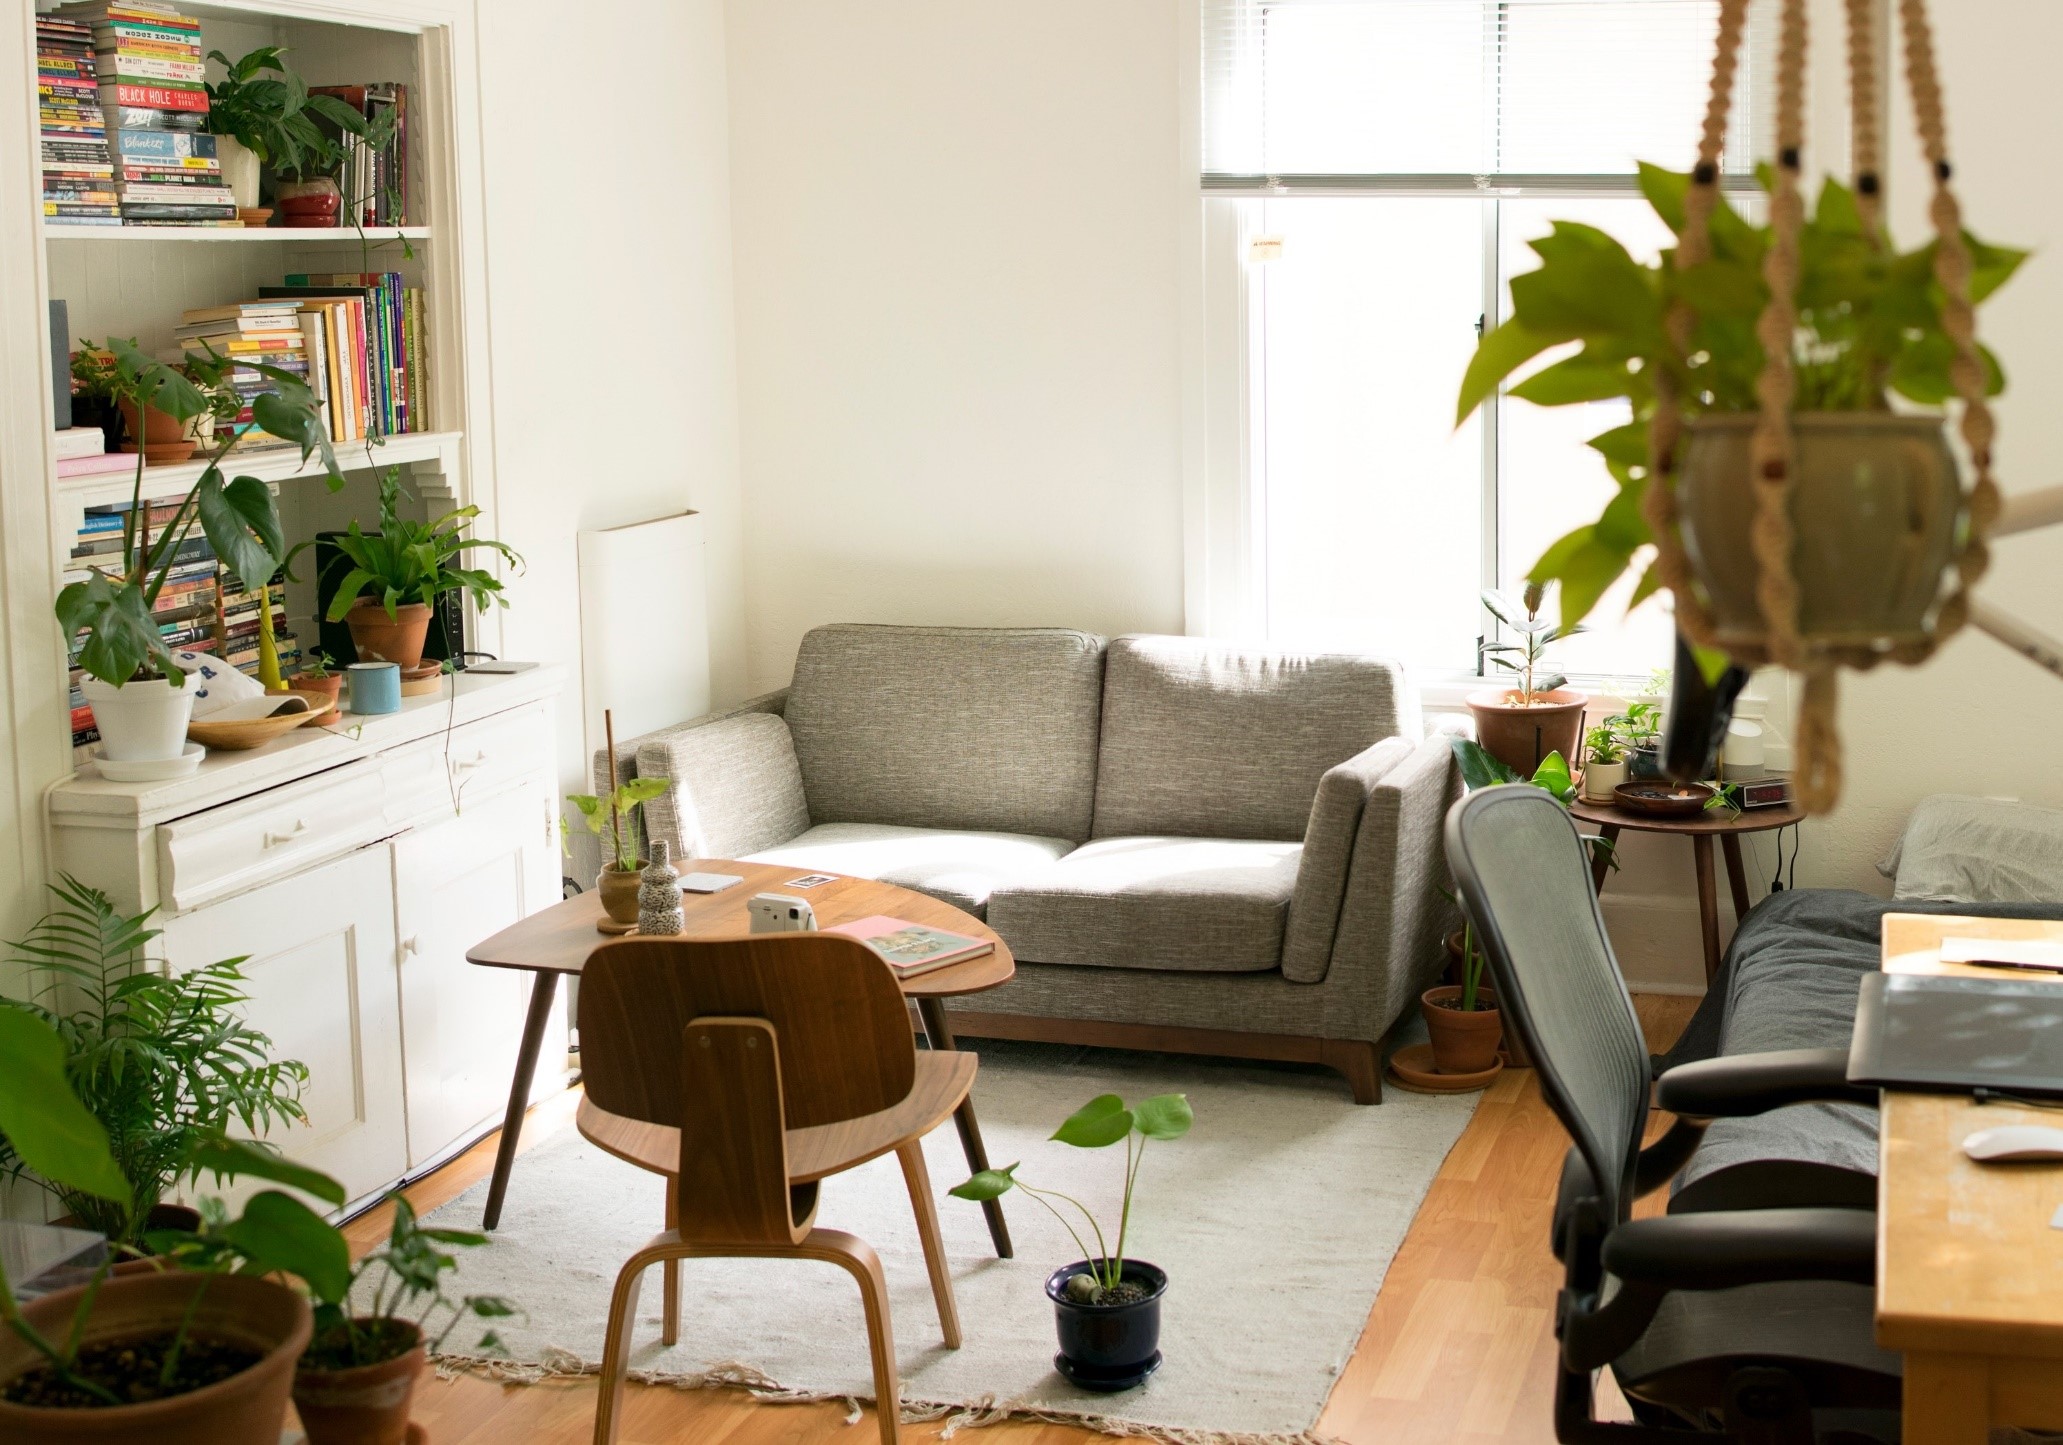 A home lounge with sofa, desk, small table and chair, shelving full of books to the left and green indoor plants everywhere.